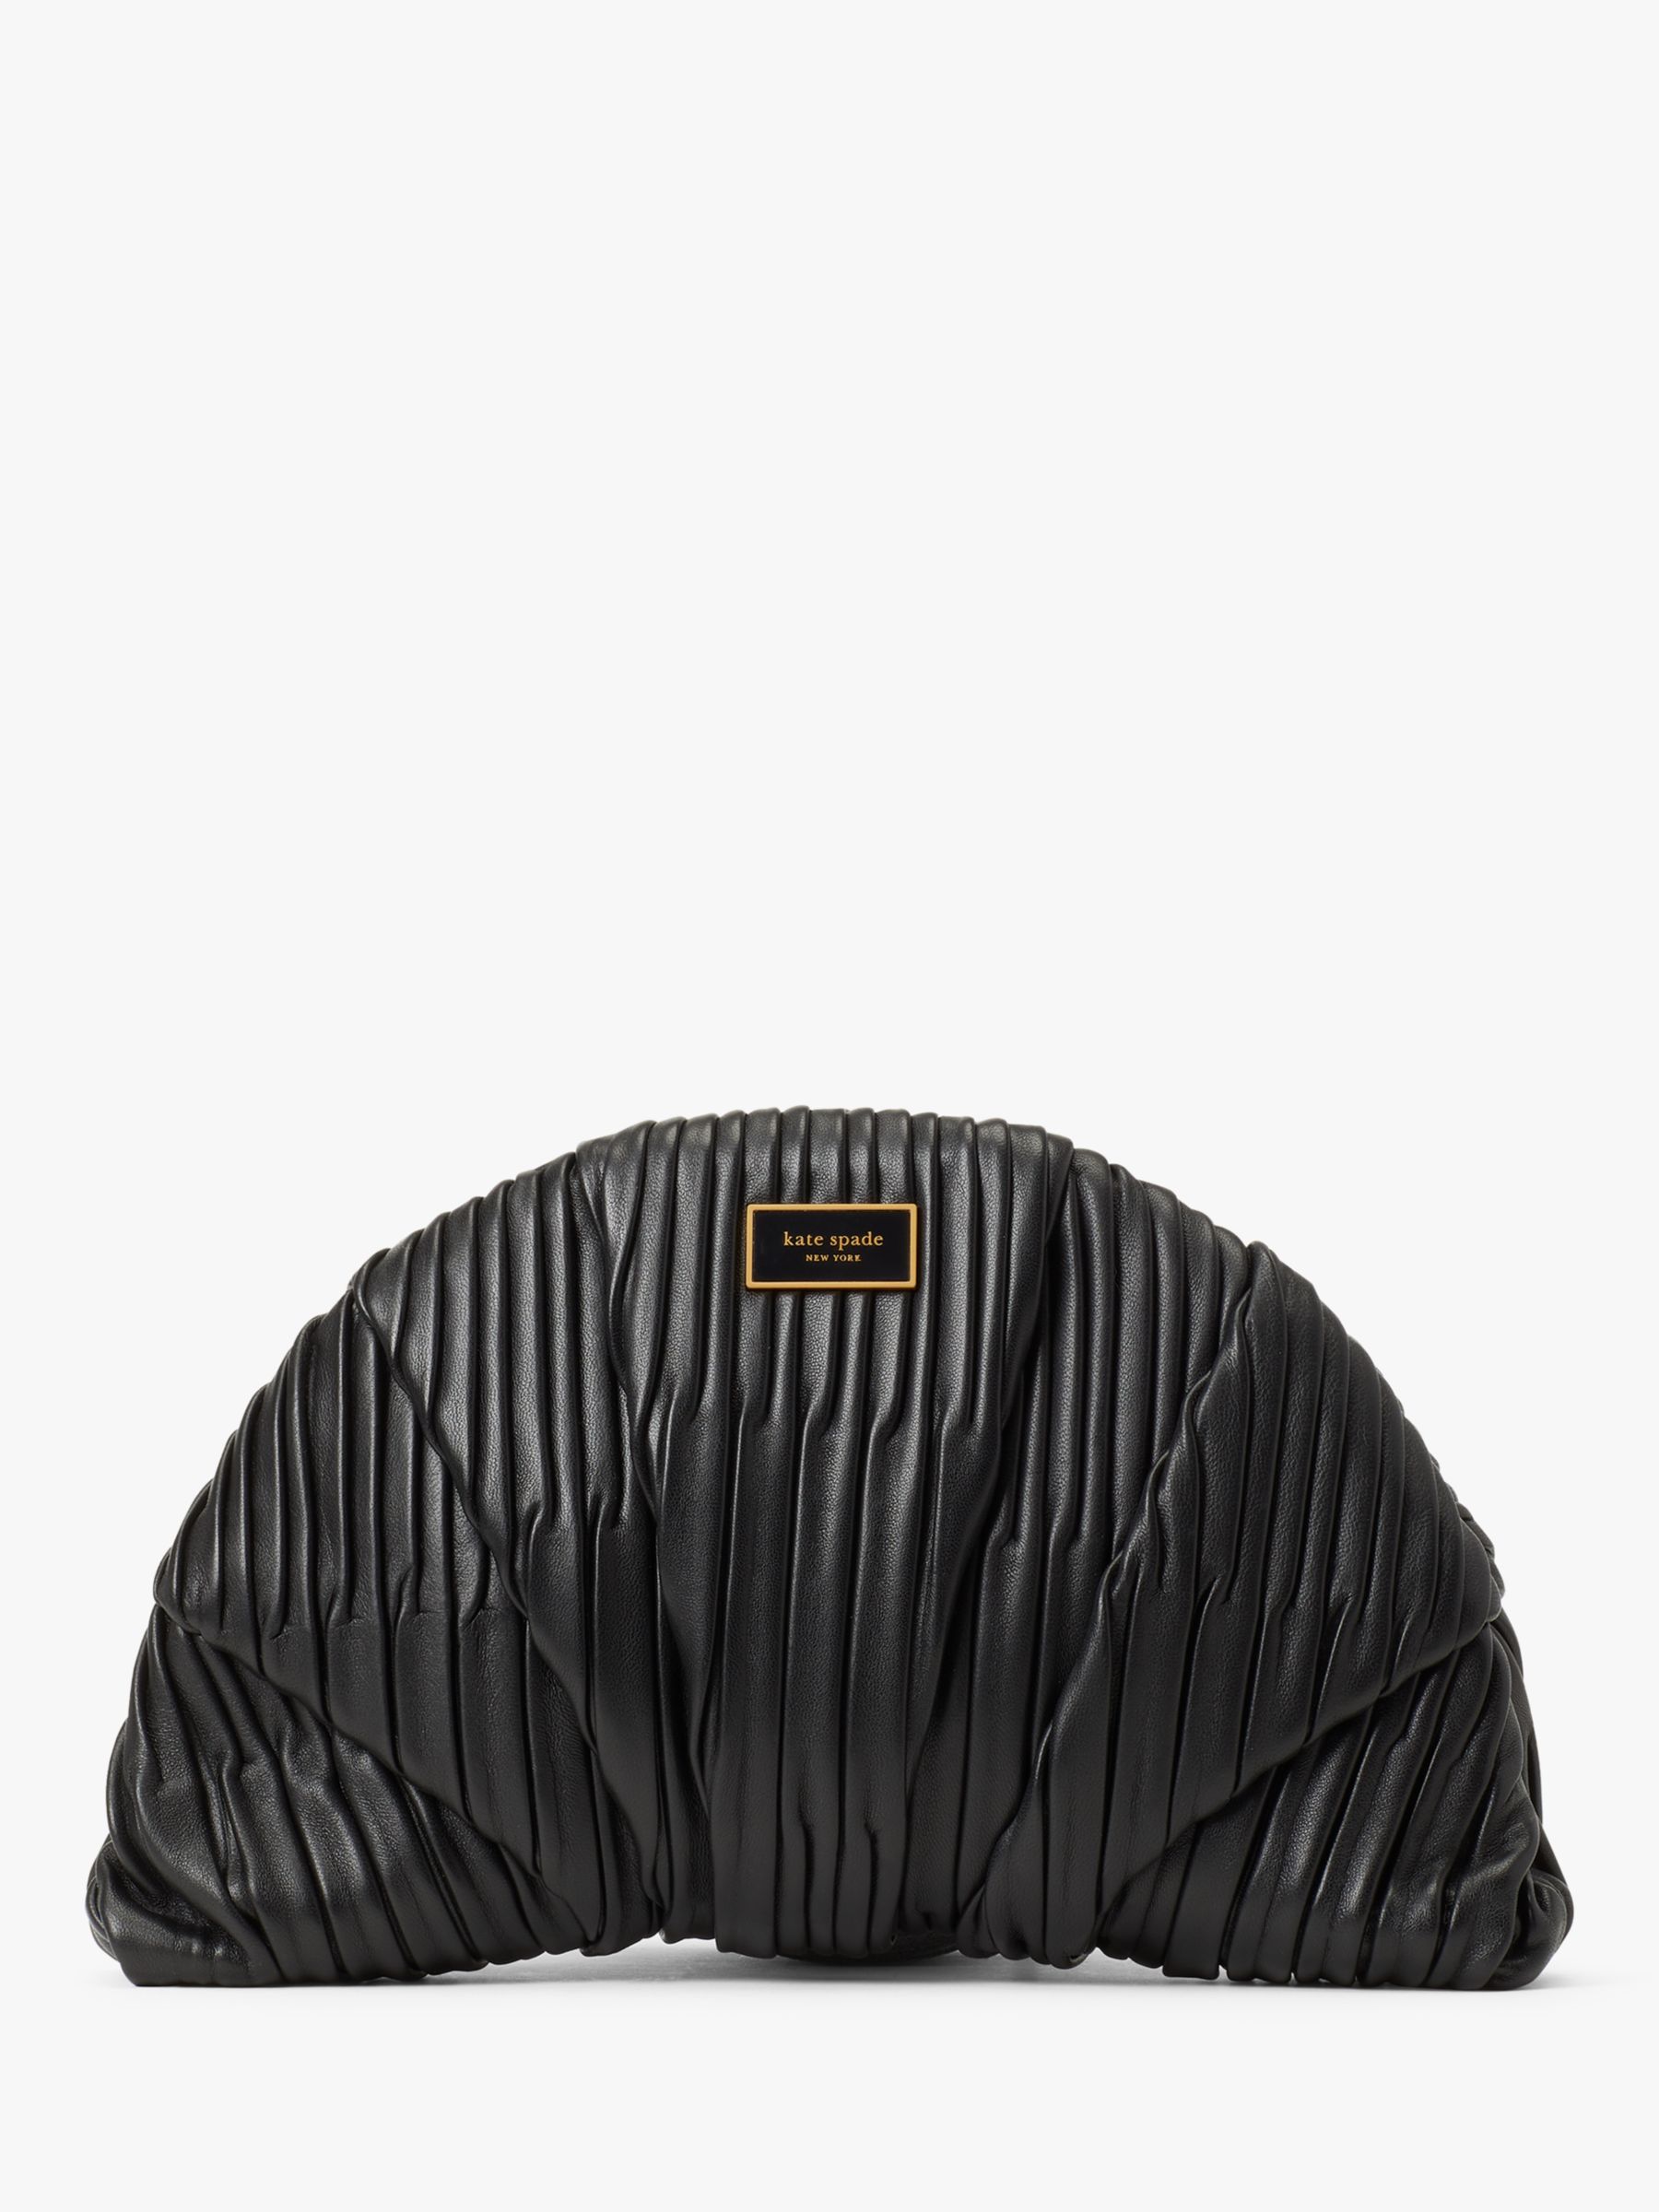 kate spade new york Leather Patisserie Pleated Croissant Clutch Bag, Black